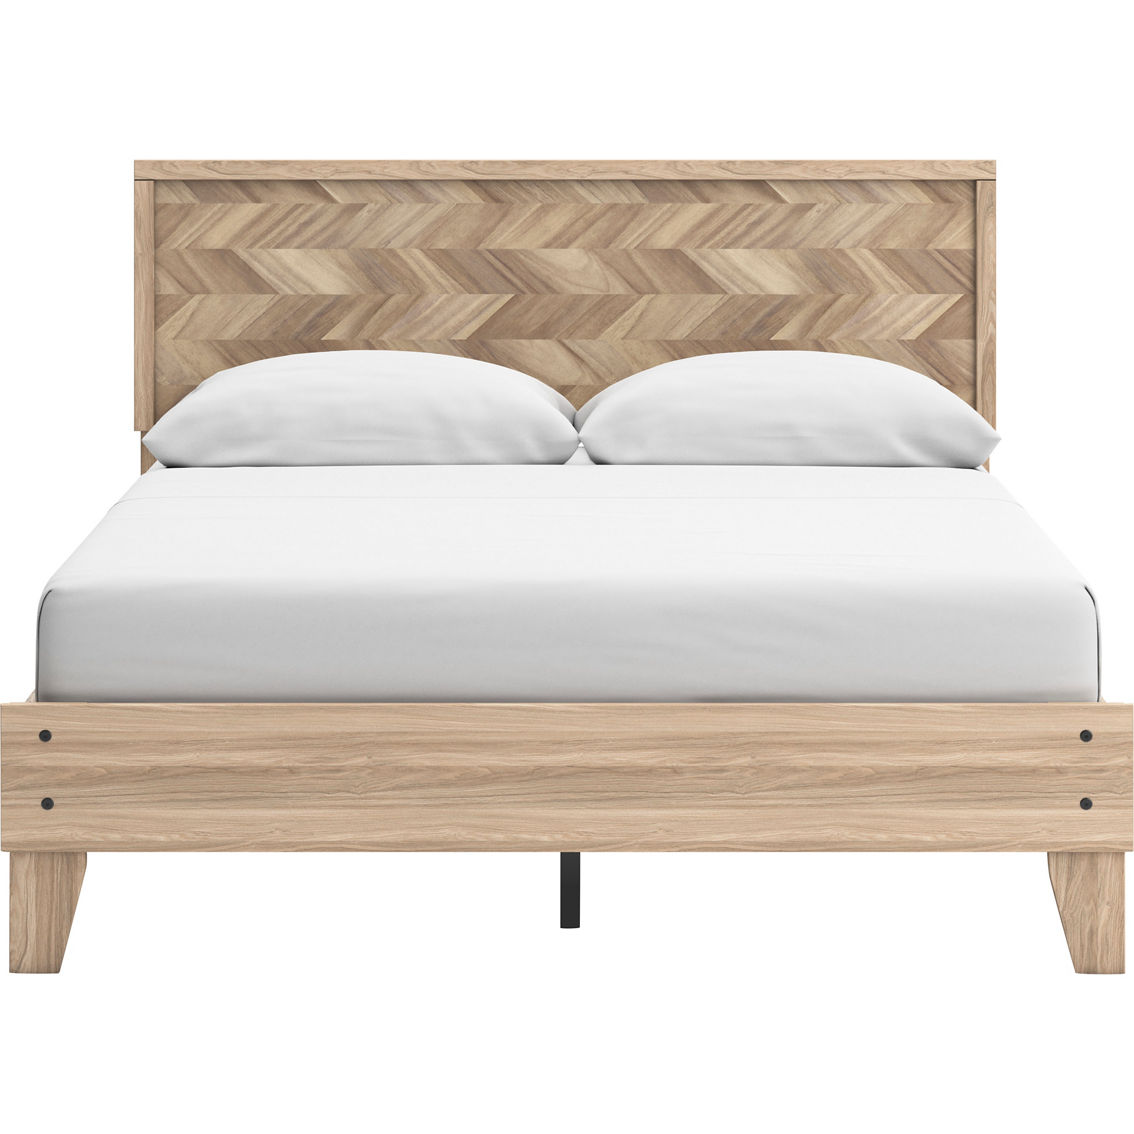 Signature Design by Ashley Battelle Ready-to-Assemble Panel Bed - Image 4 of 7